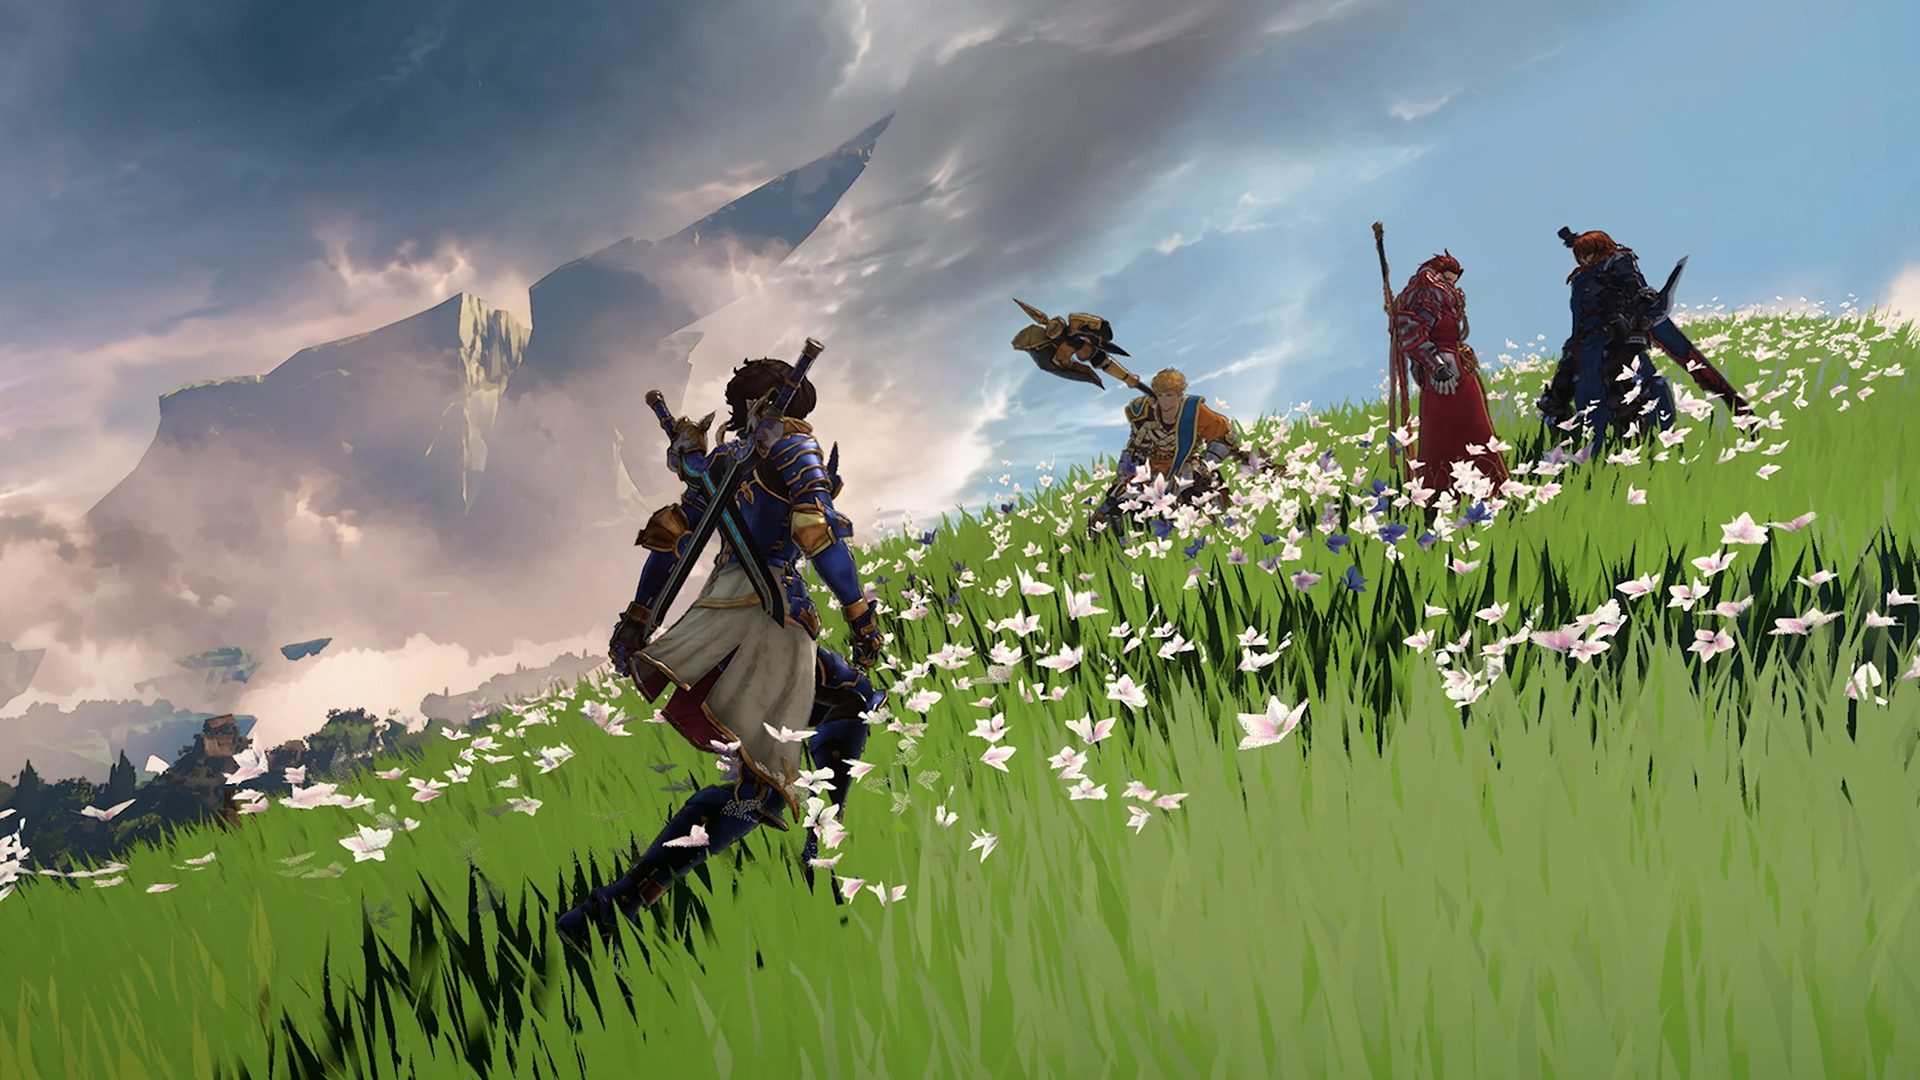 Granblue Fantasy: Relink devs discuss crafting an immersive RPG